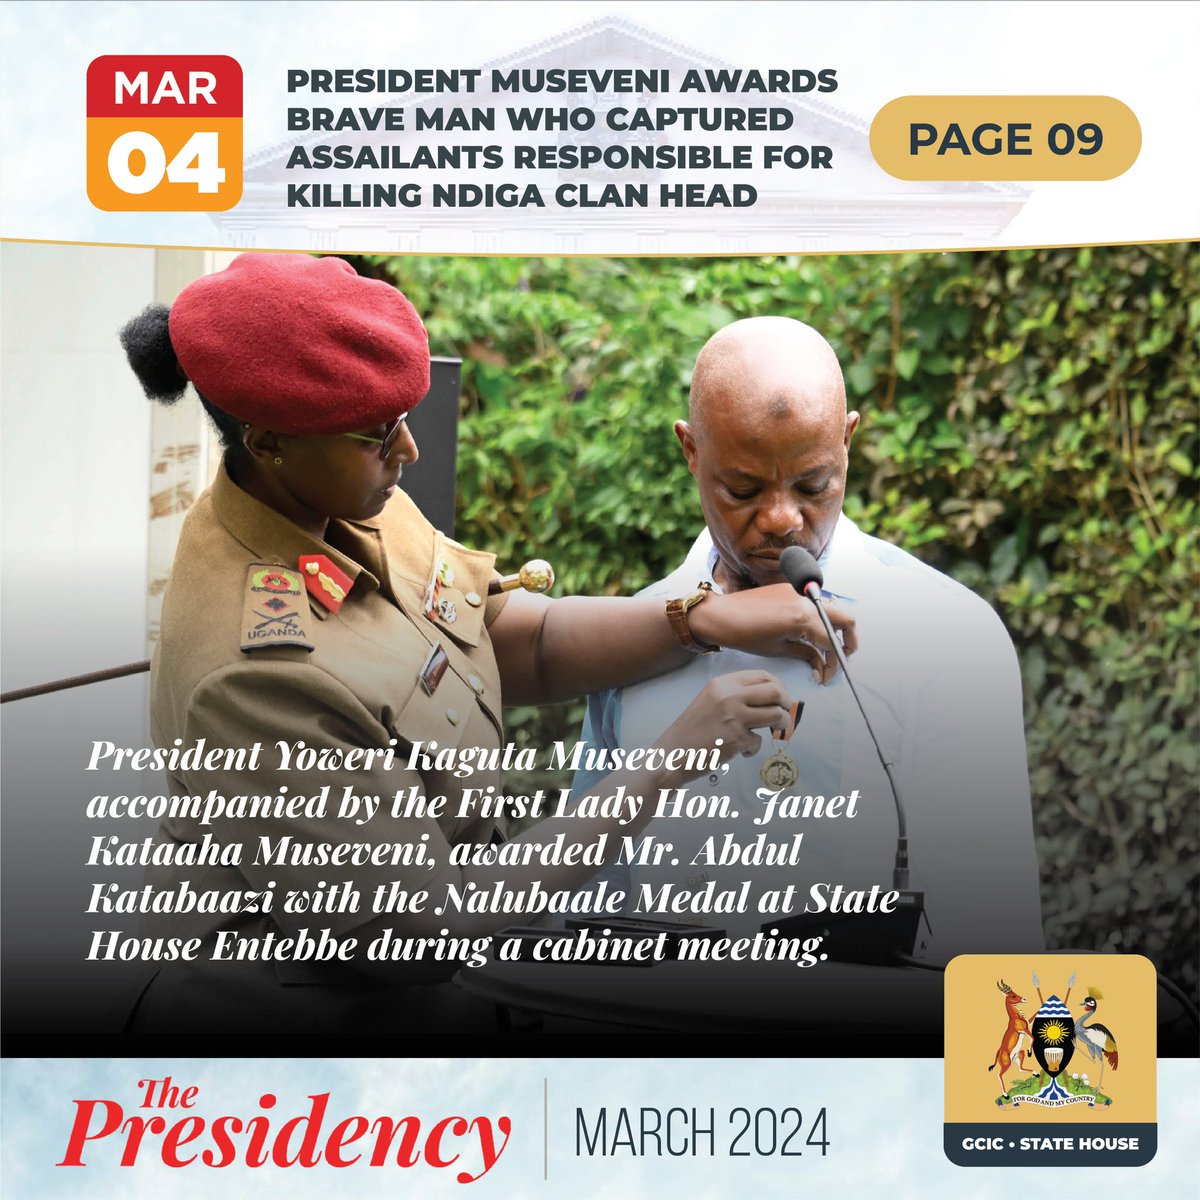 On March 4th, President Museveni awarded the brave man who captured the assailants responsible for killing the Ndiga clan head. #ThePresidencyUG #OpenGovUG